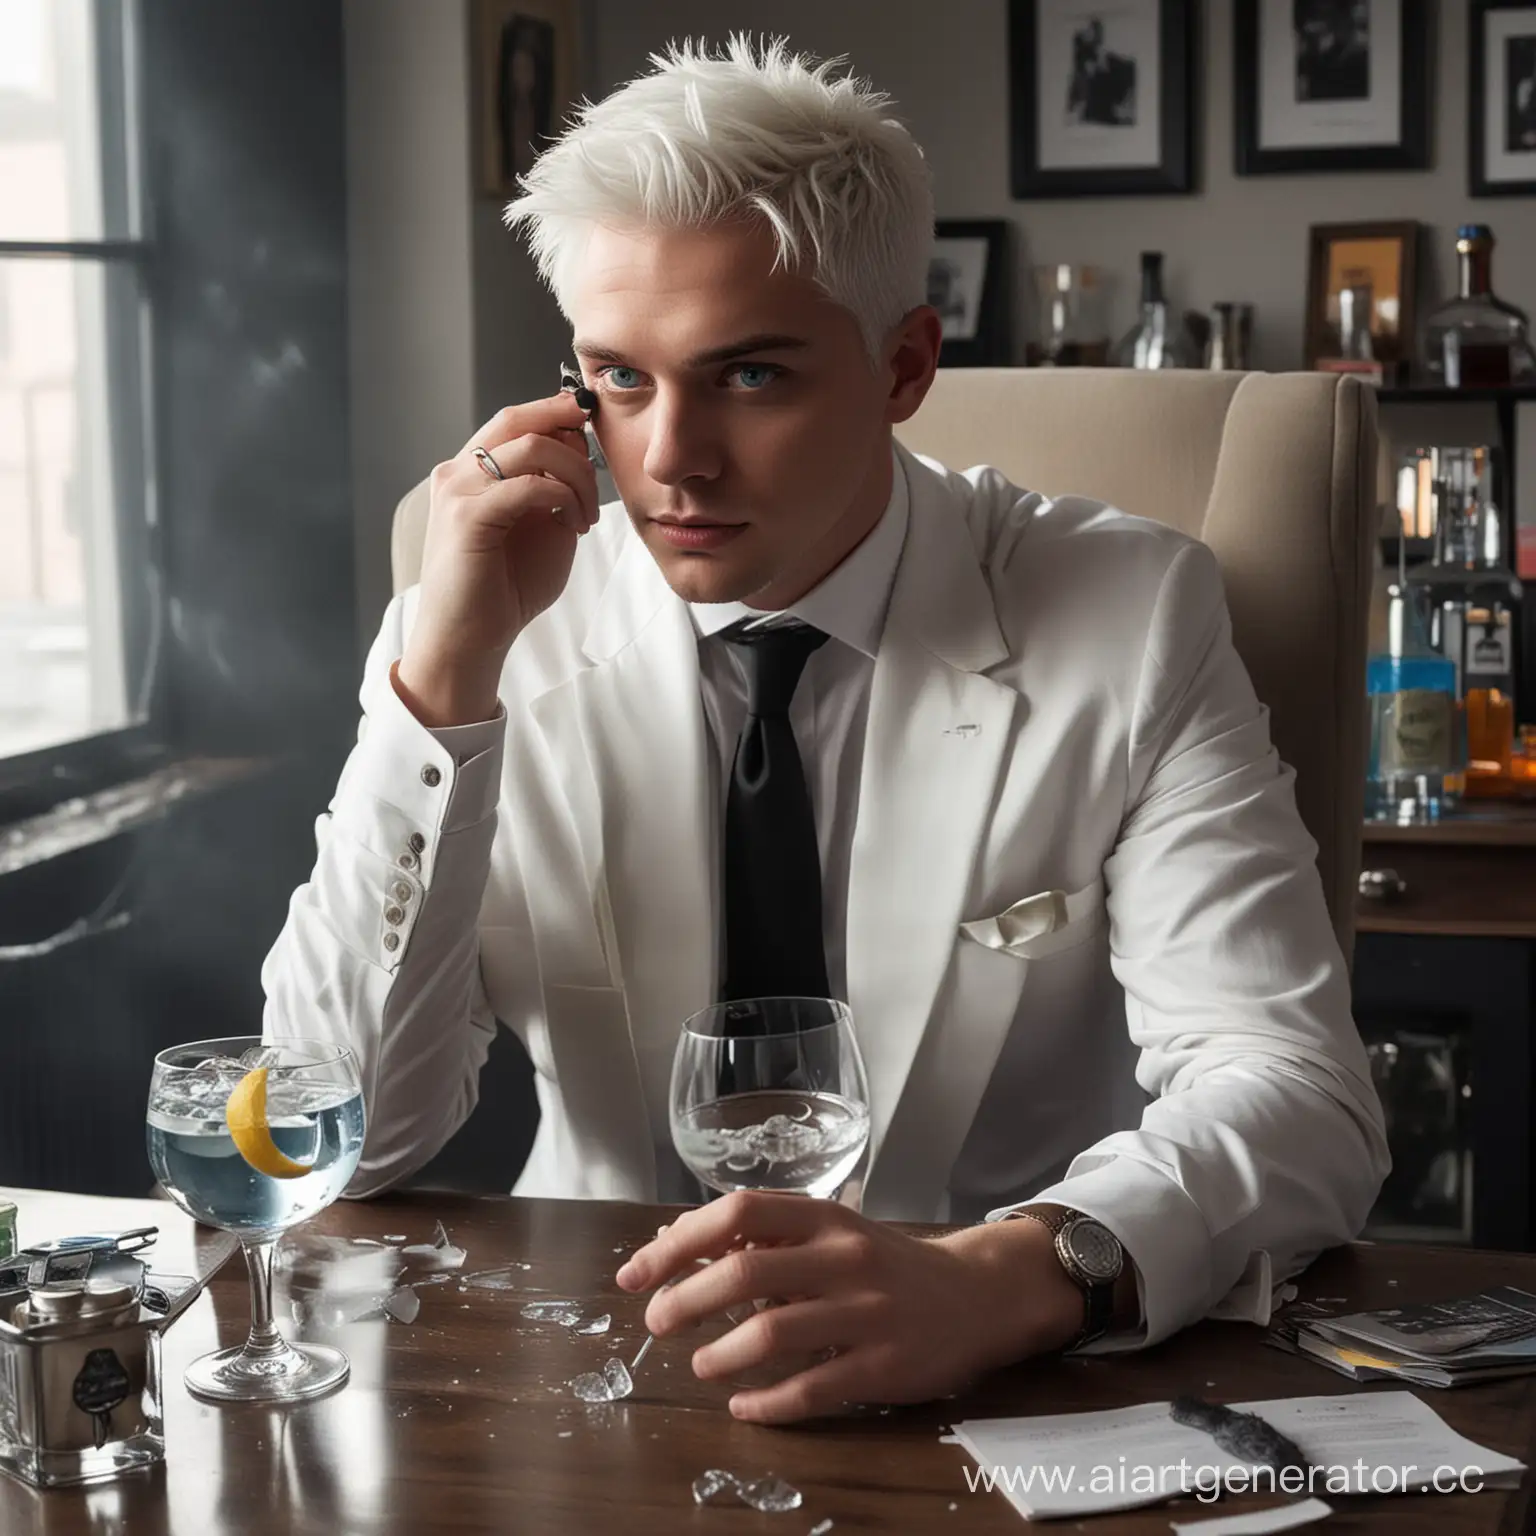 Mark-Fallen-Angel-Fashion-Designer-Sips-Gin-and-Tonic-in-Stylish-Office